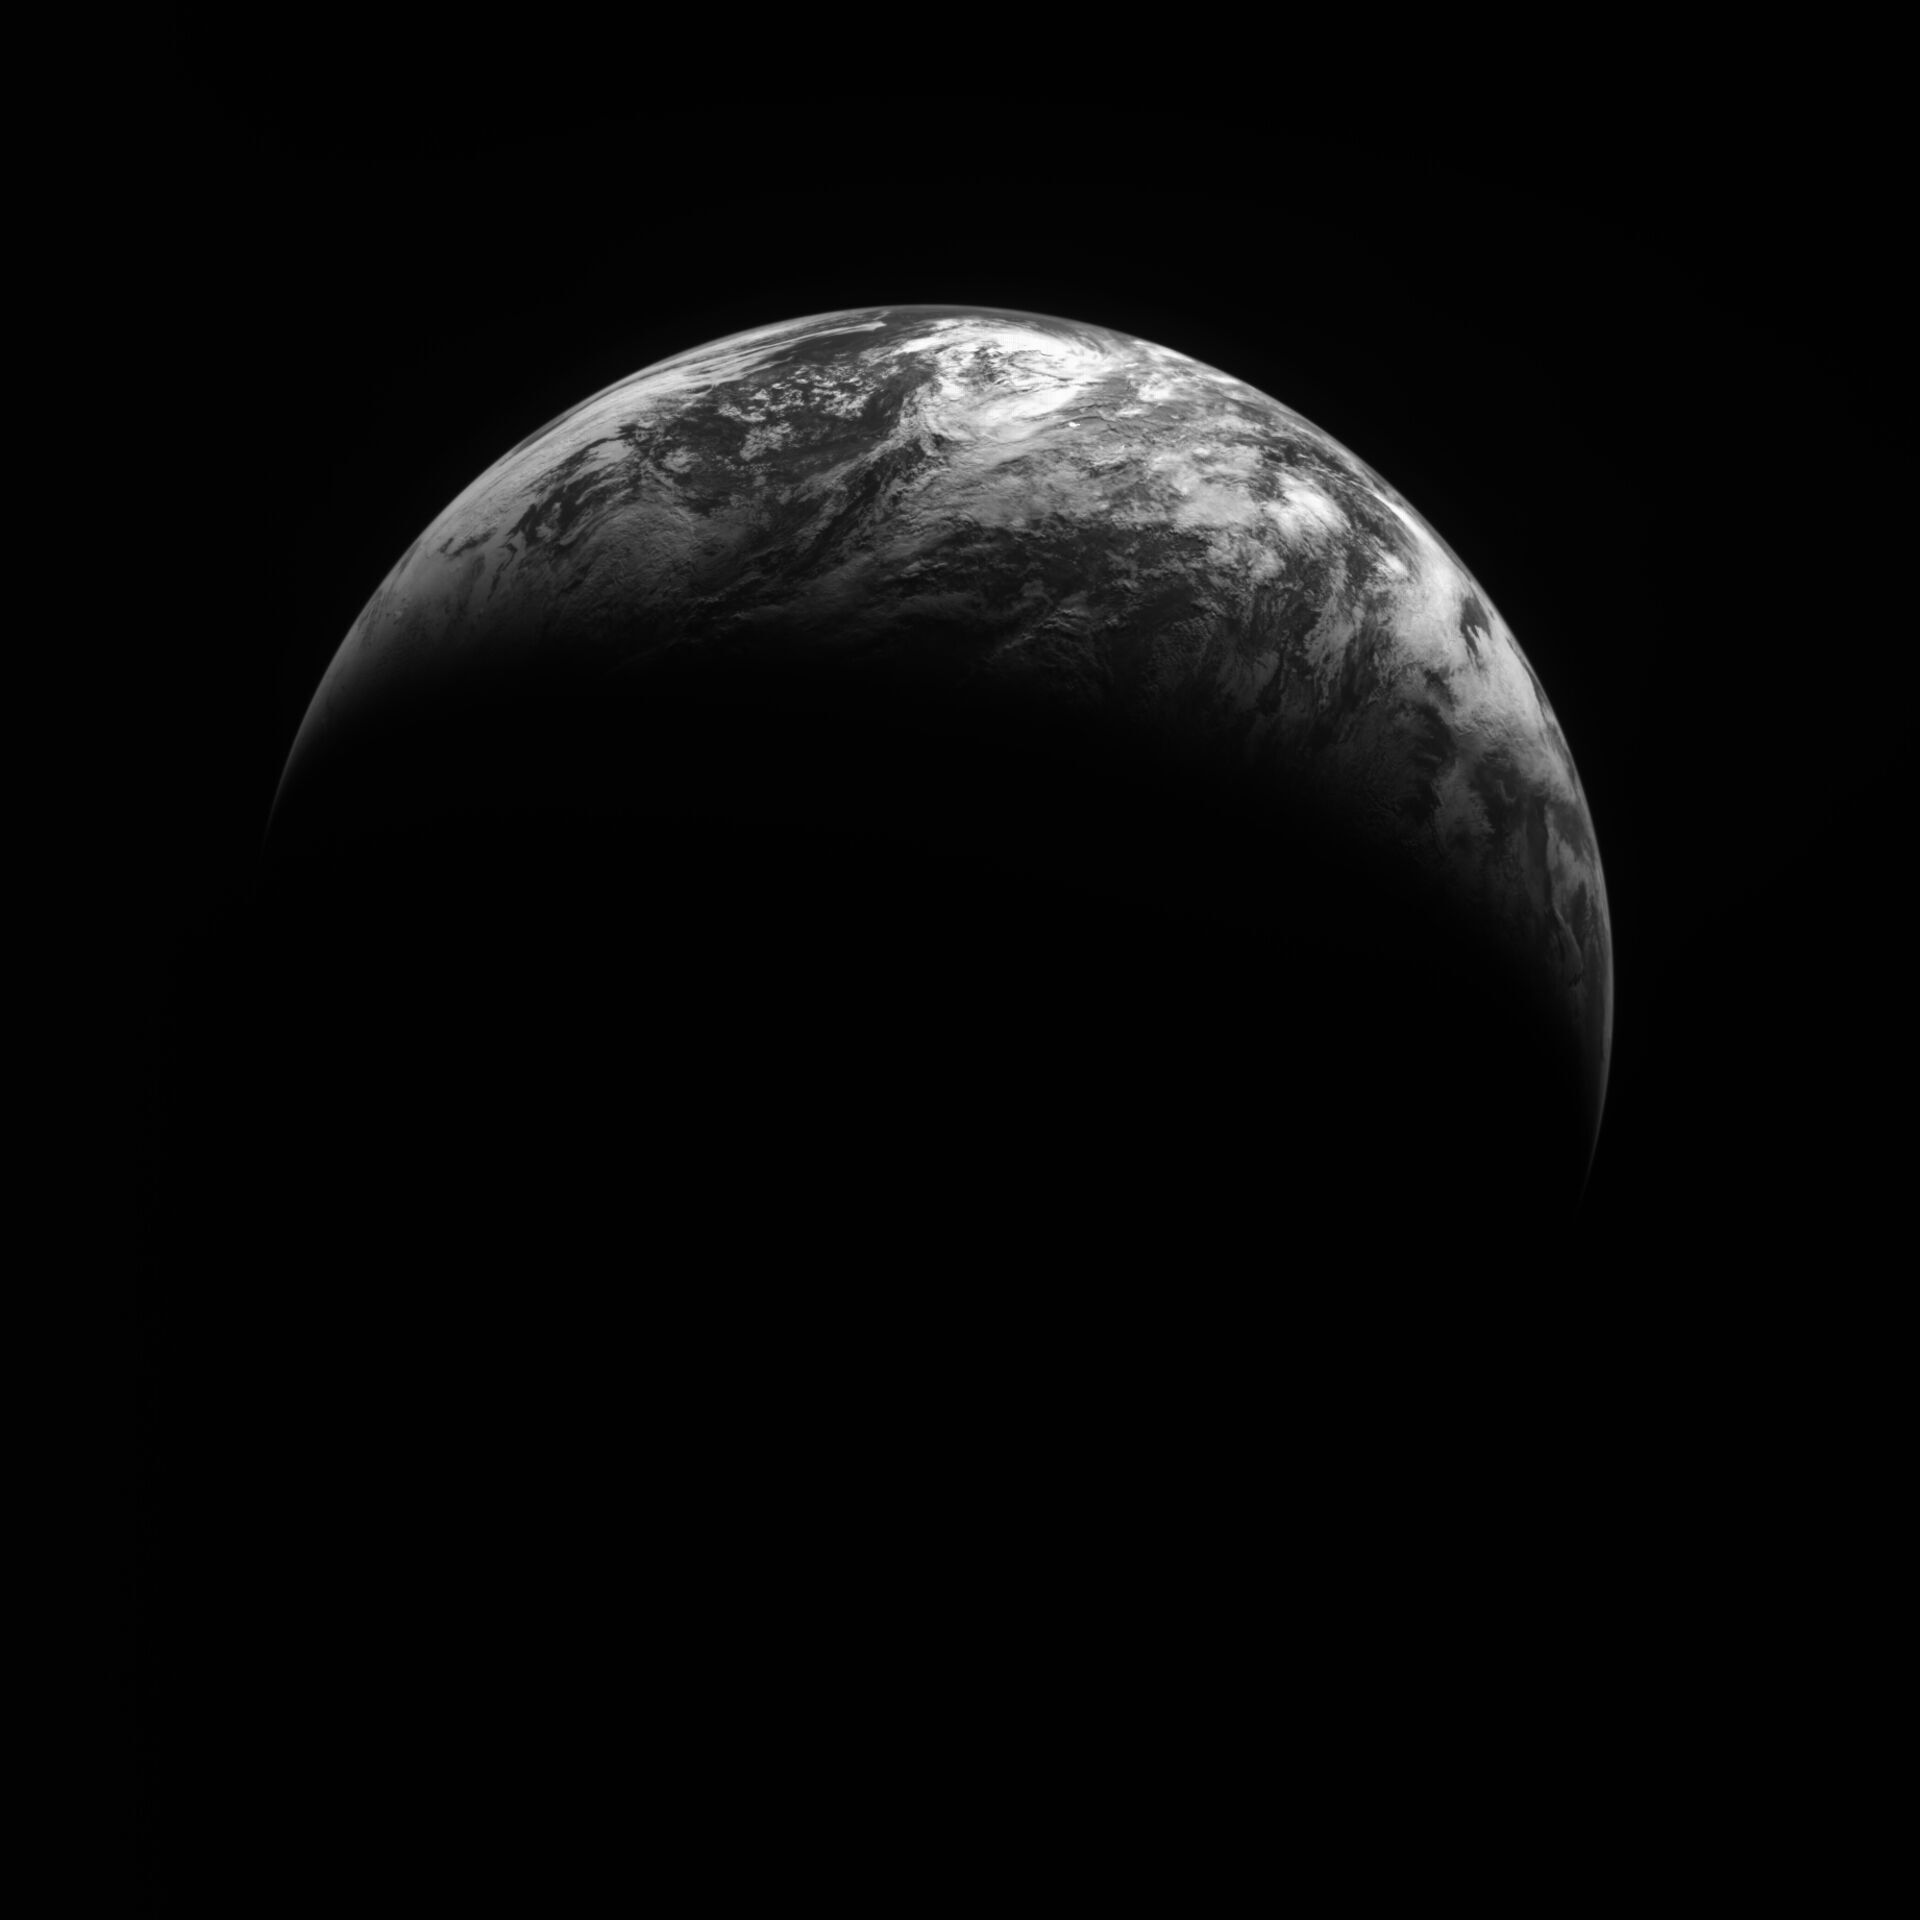 Photo of the Earth from the Moon's orbit, taken on January 1, 2023.